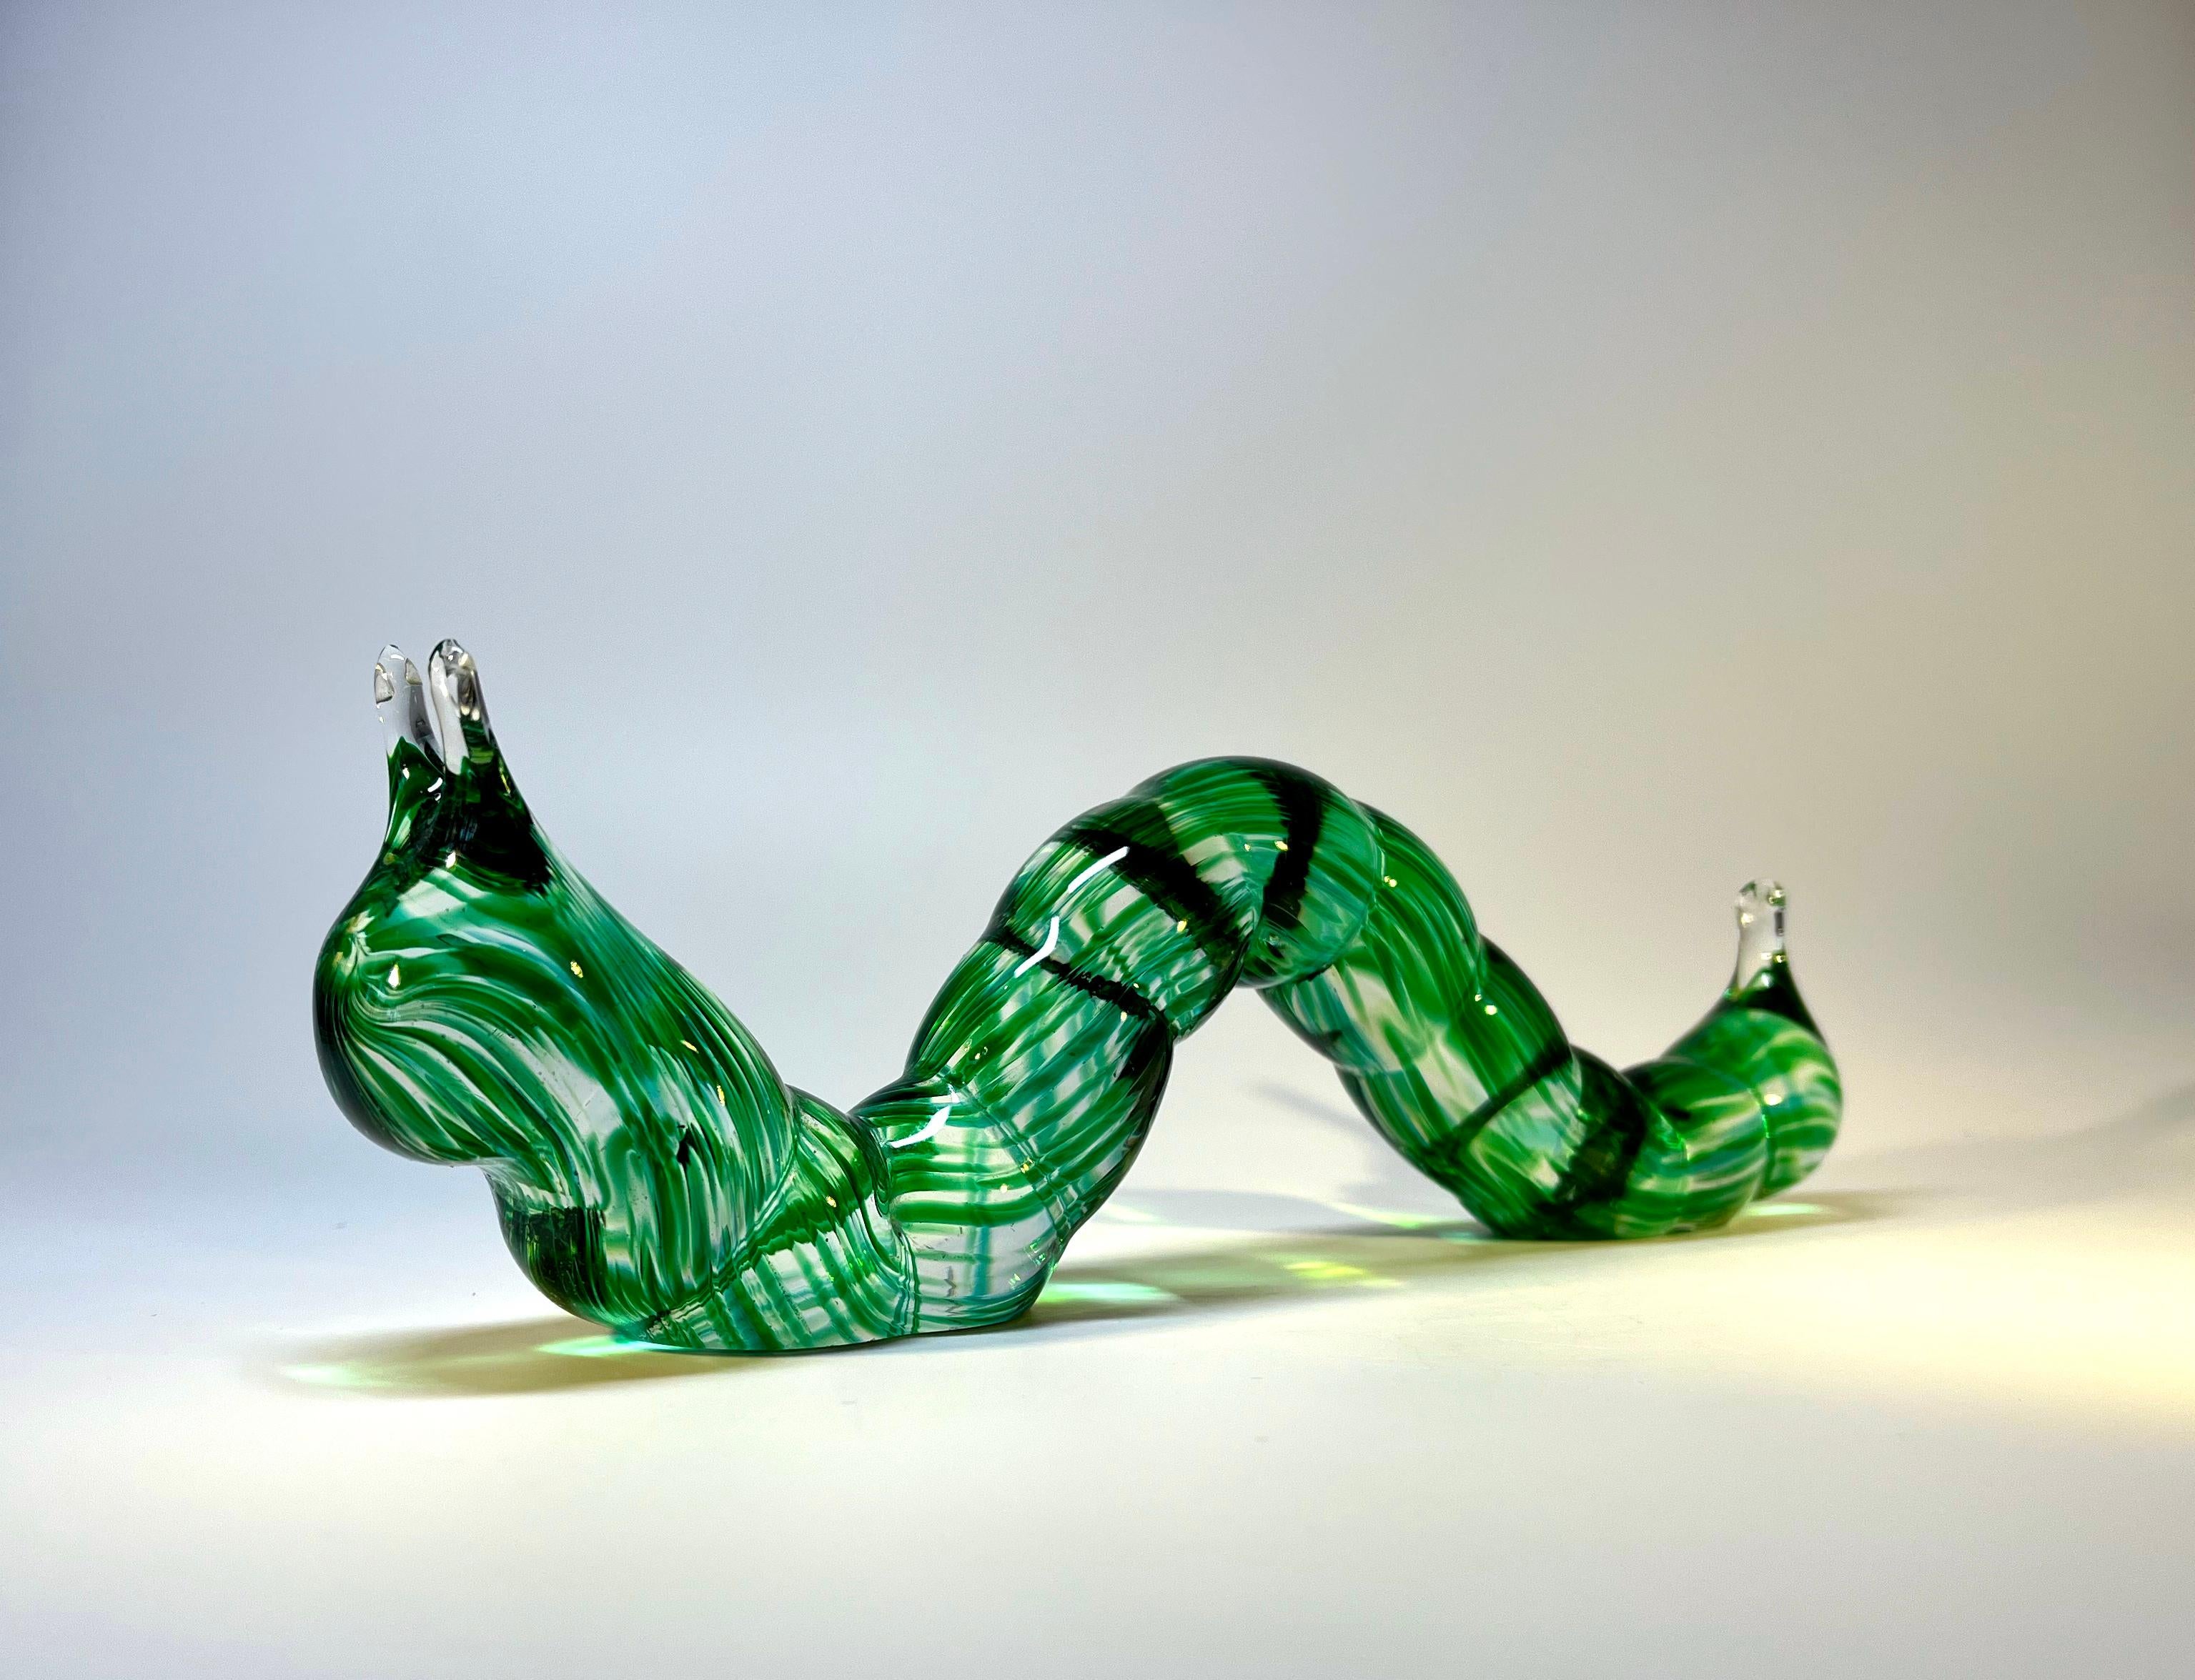 Eye catching large Murano glass Inchworm Caterpillar 
Bright green marl throughout, a fun piece of vintage Murano
Circa 1970's
Height 3.25 inch,  Width 1.5 inch, Length 9.5 inch
Very good condition. Minor surface wear to base
Wear consistent with